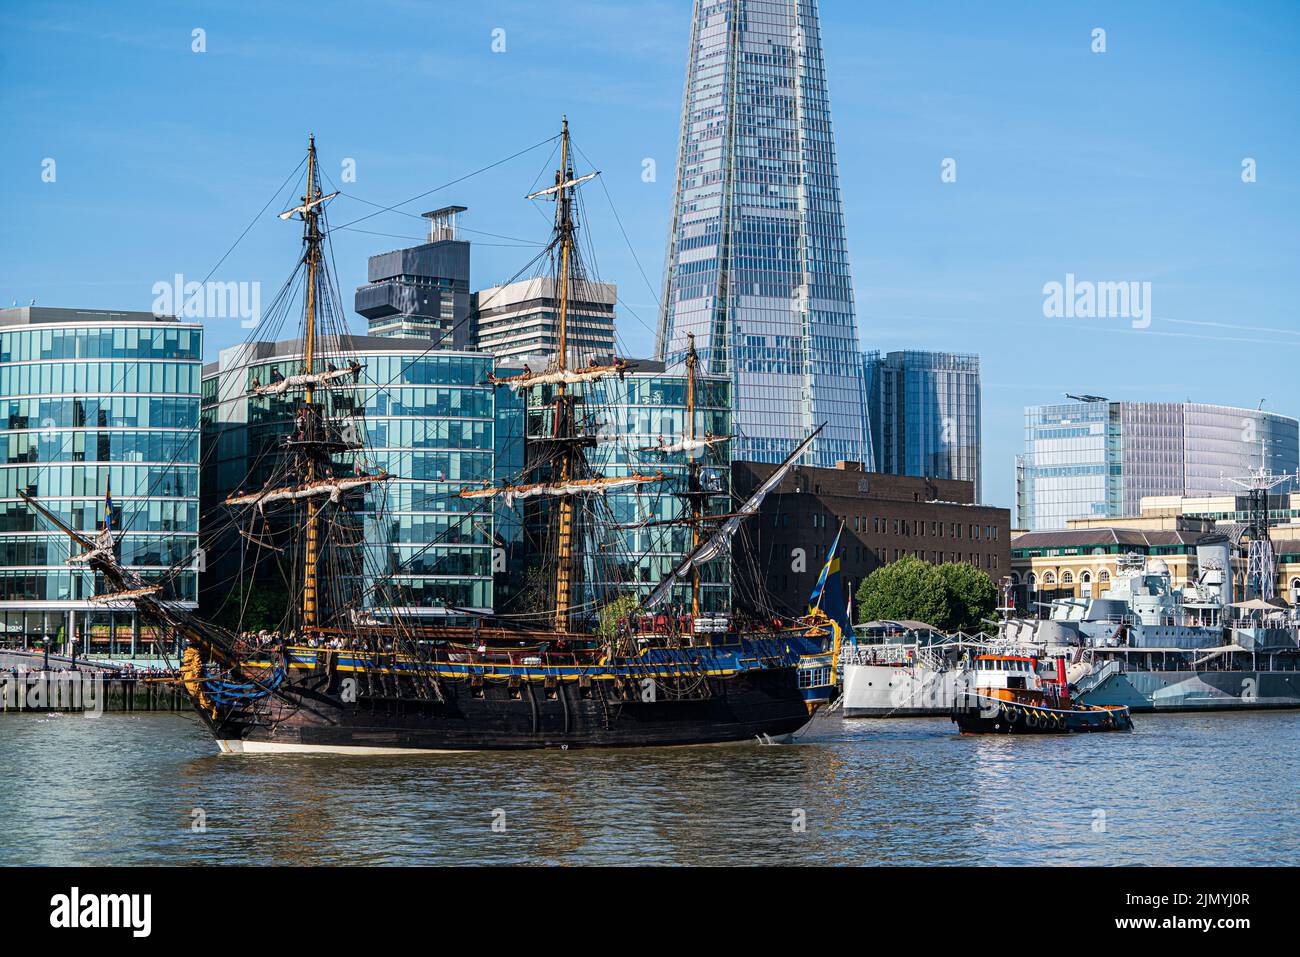 London, UK. 8 August 2022   The Götheborg of Sweden  mast  ship passees under tower bridge as it sails into London under clear blue skies. The Götheborg of Sweden is a replica of the Swedish east Indiaman Göthenburg I , launched in 1738 Credit. amer ghazzal/Alamy Live News Stock Photo